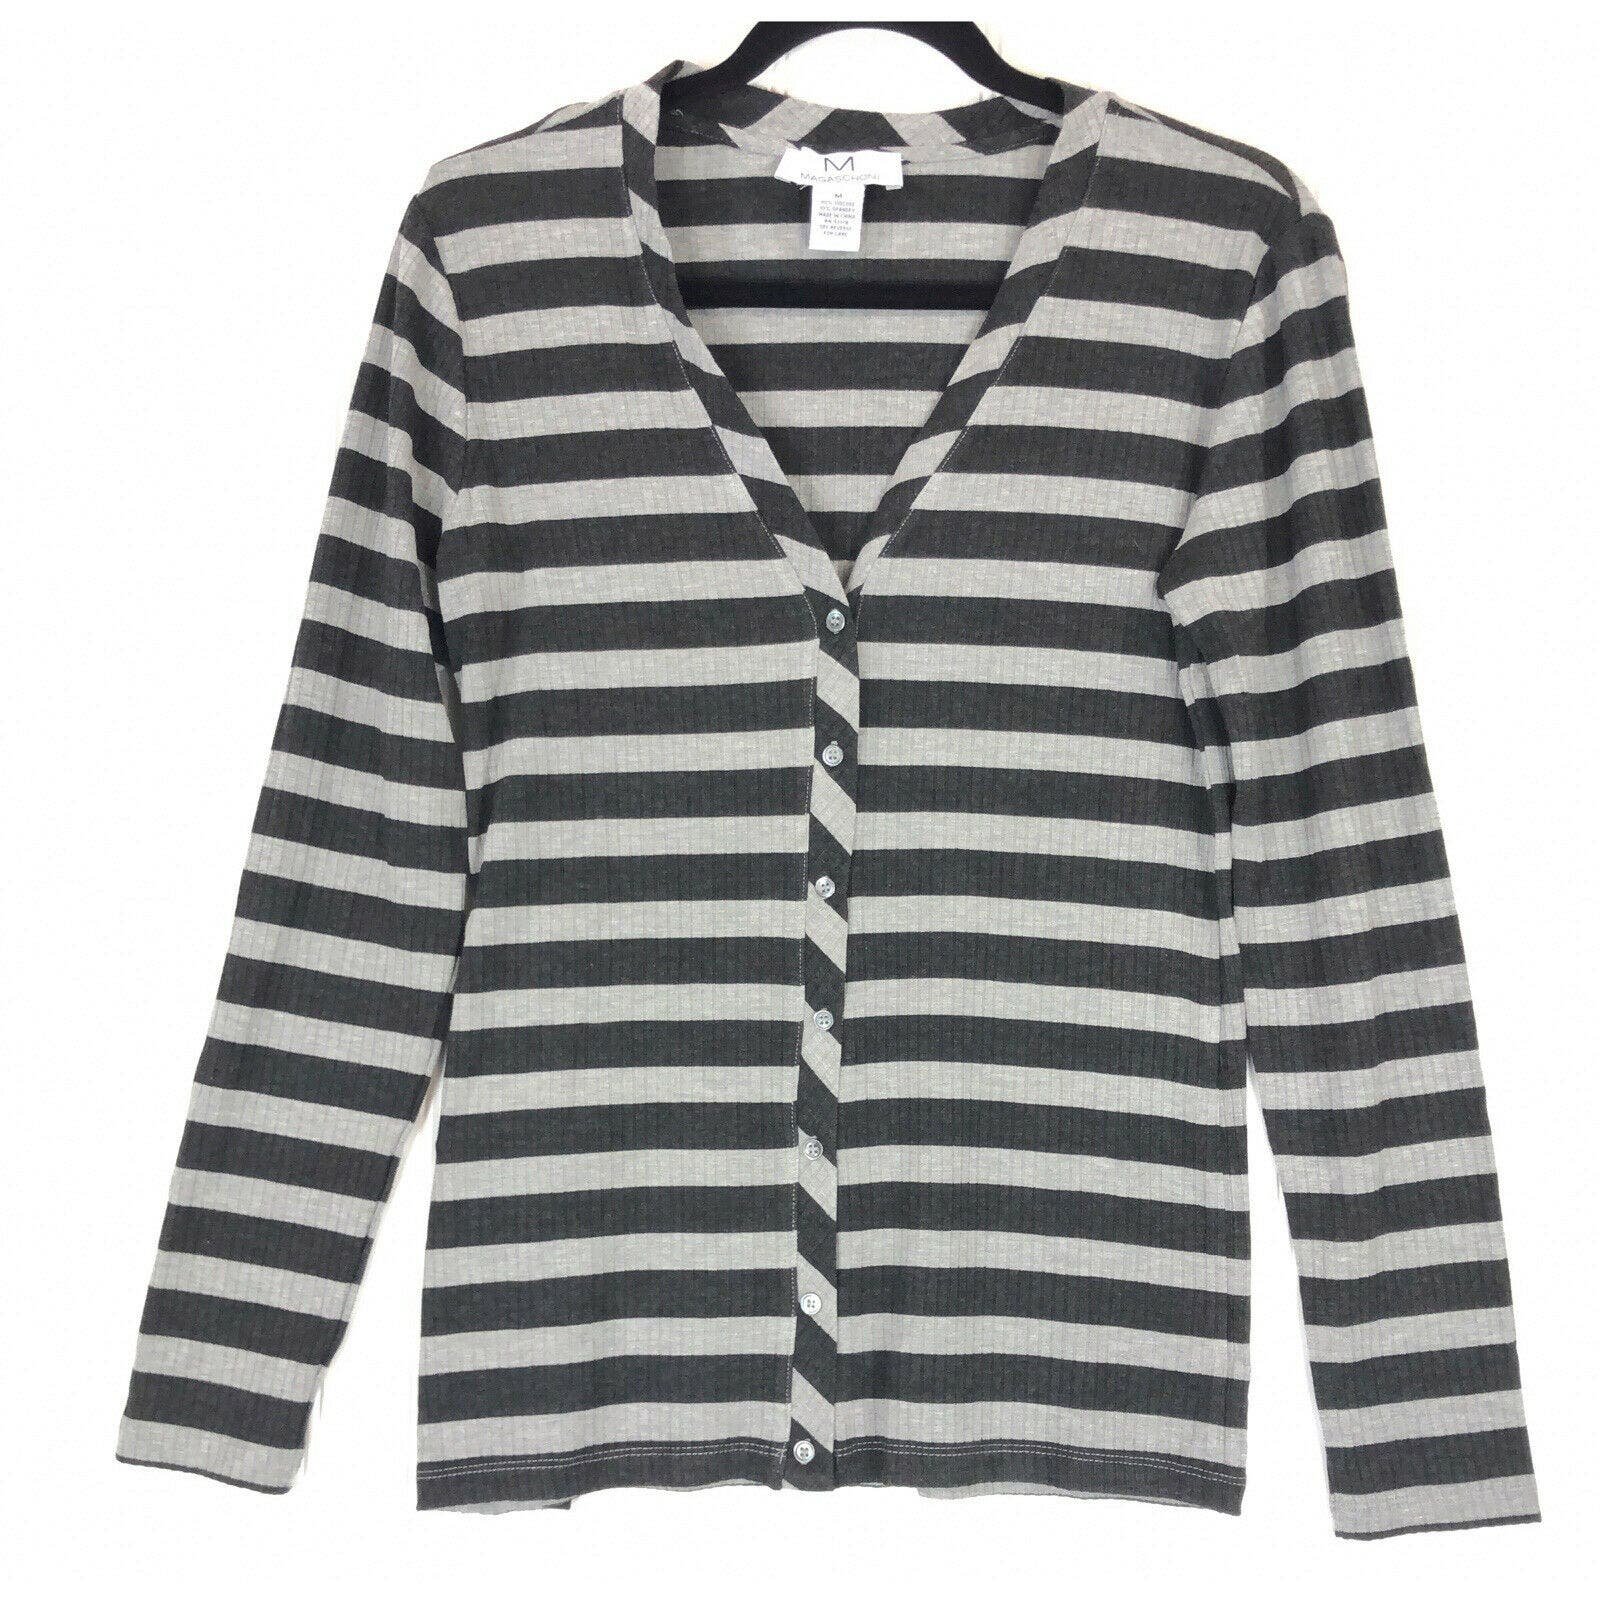 Latest  M Magaschoni size Medium cardigan gray striped ribbed knit M GInAcRcYt Outlet Store